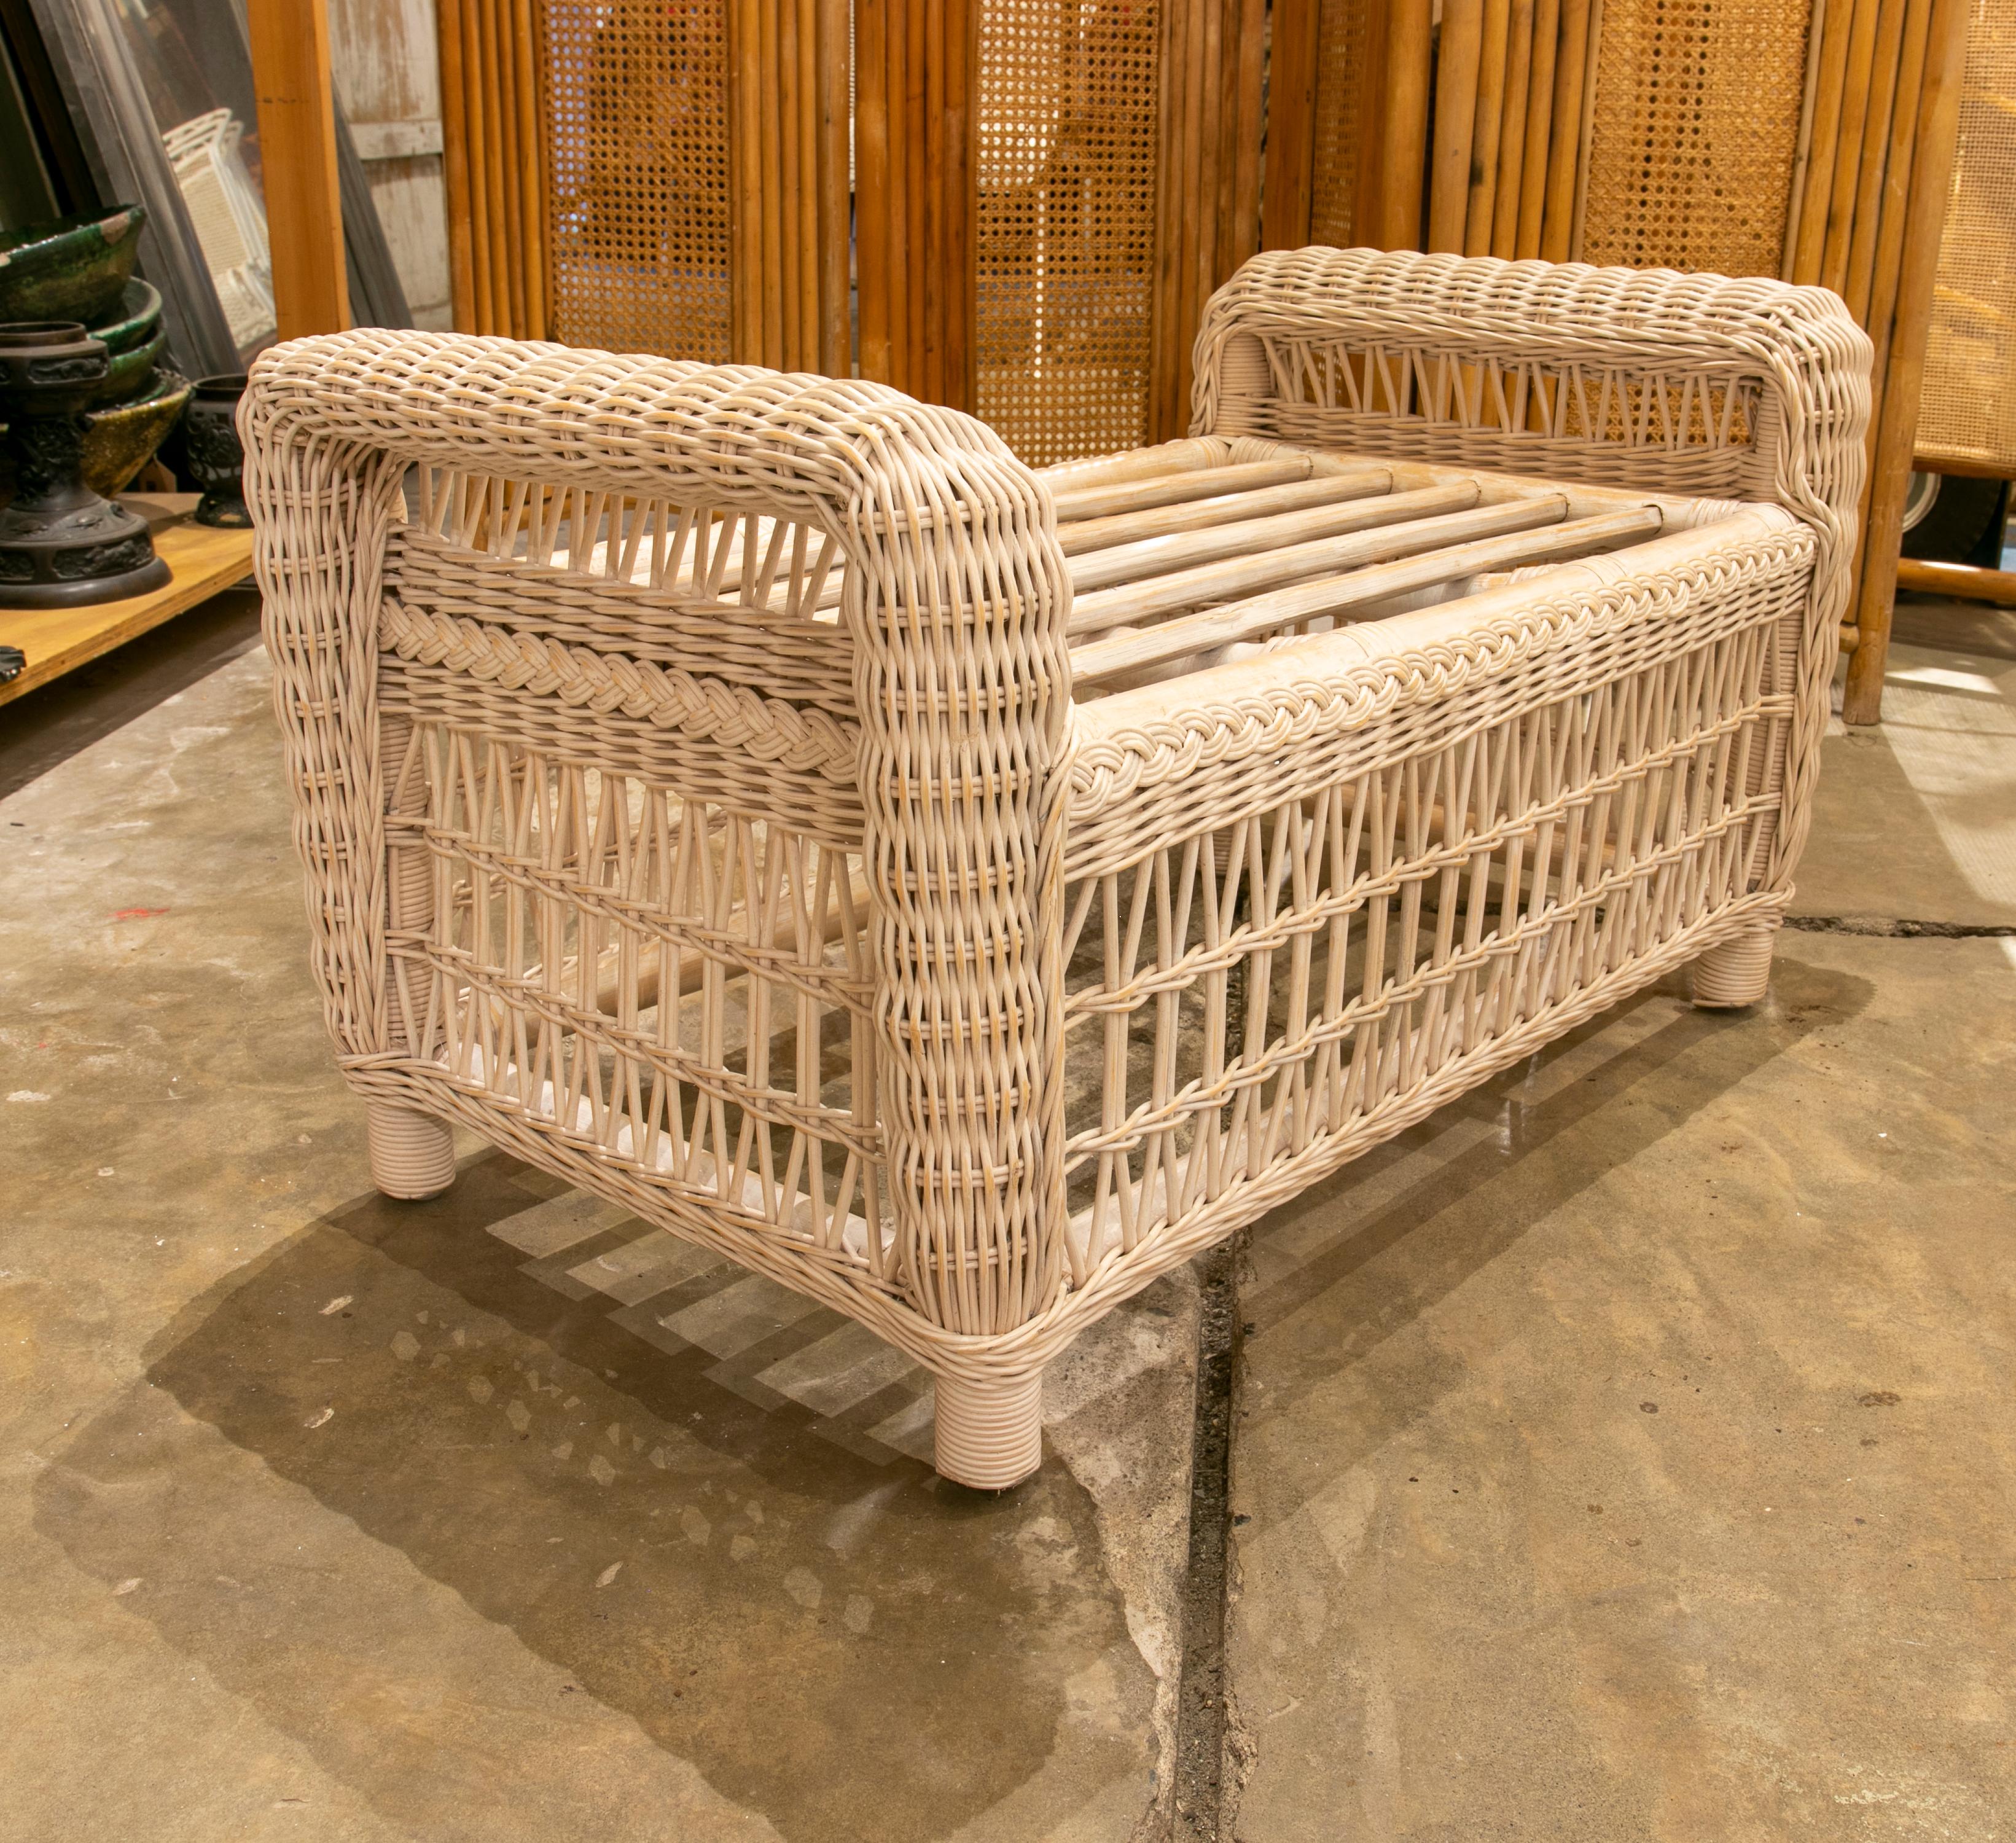 20th Century Handmade Bamboo and Wicker Stool Painted in White Colour